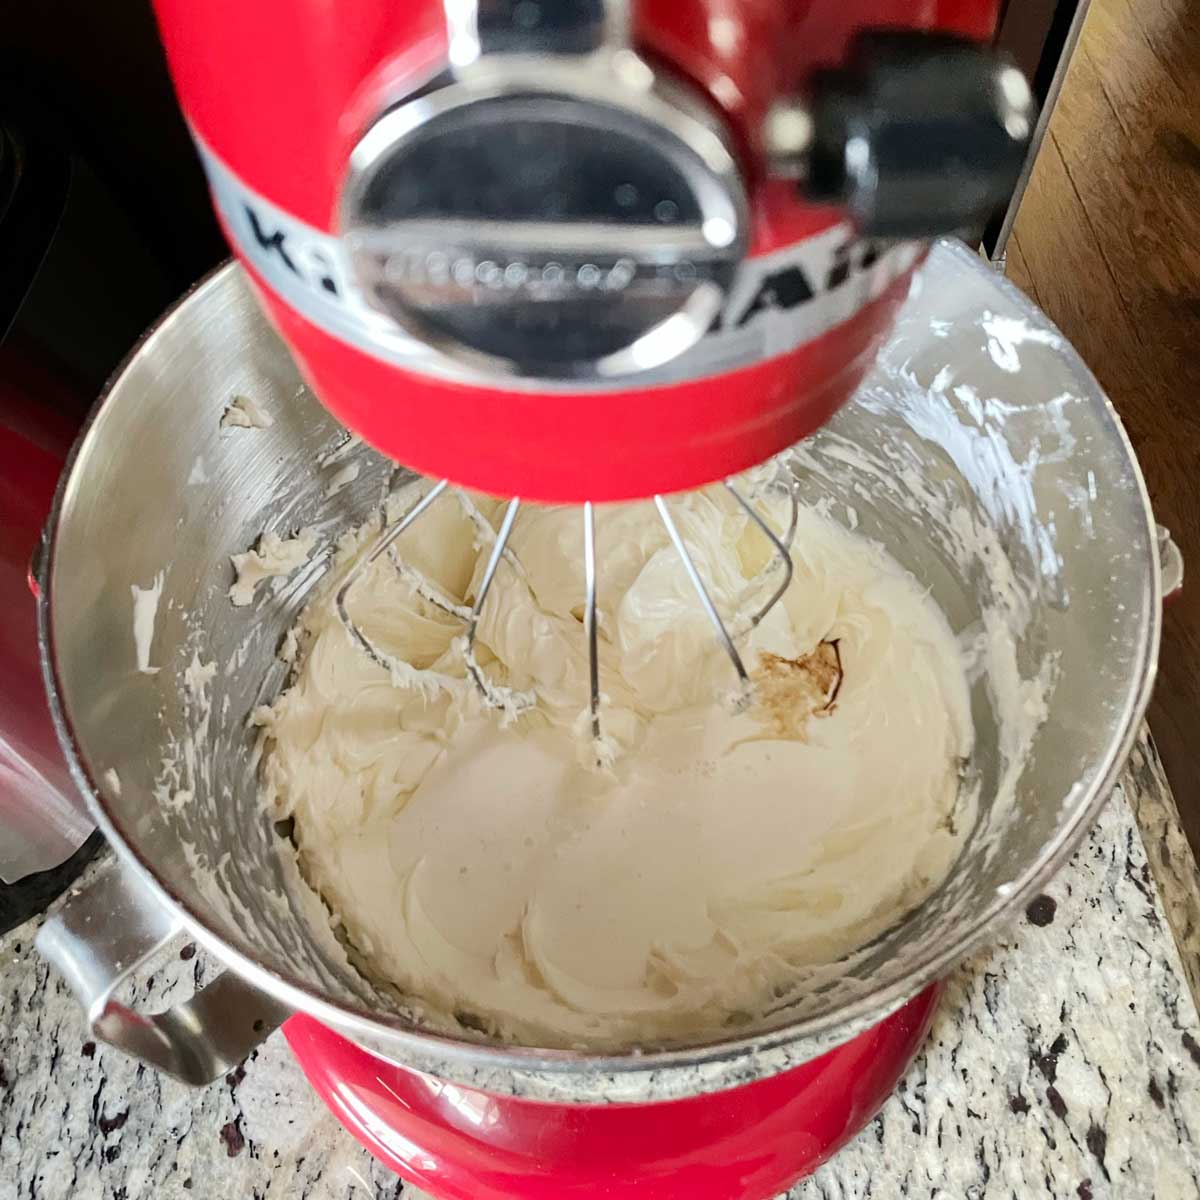 Cream mix for Air fryer cheesecake.